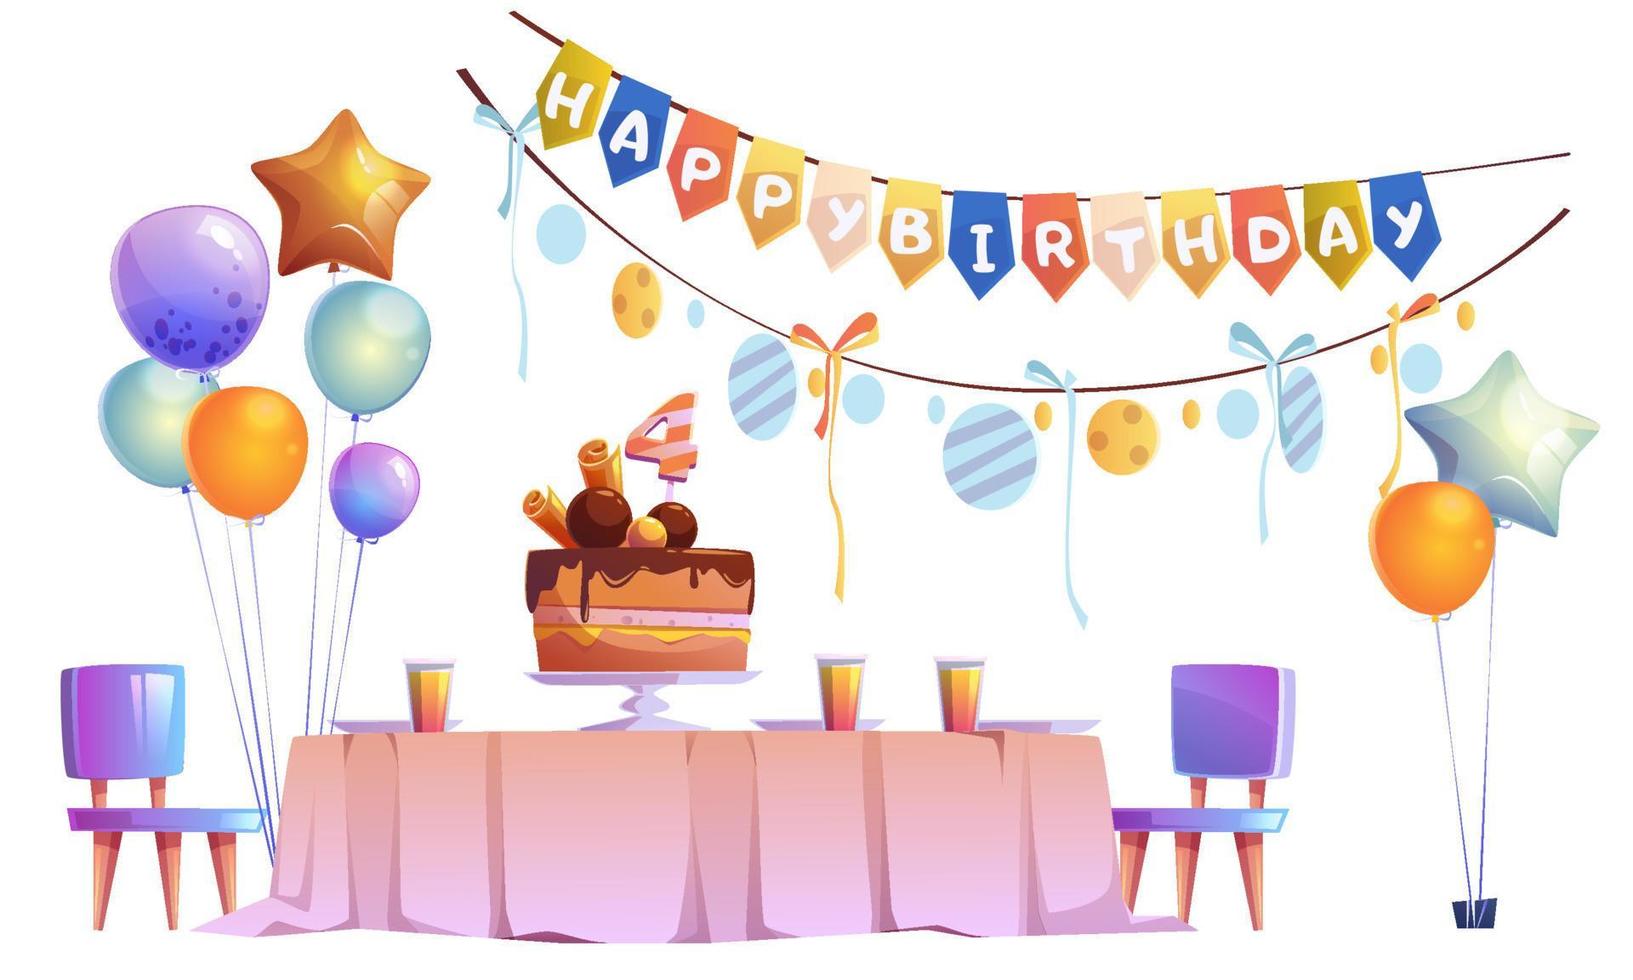 Kids birthday party decoration and festive cake vector